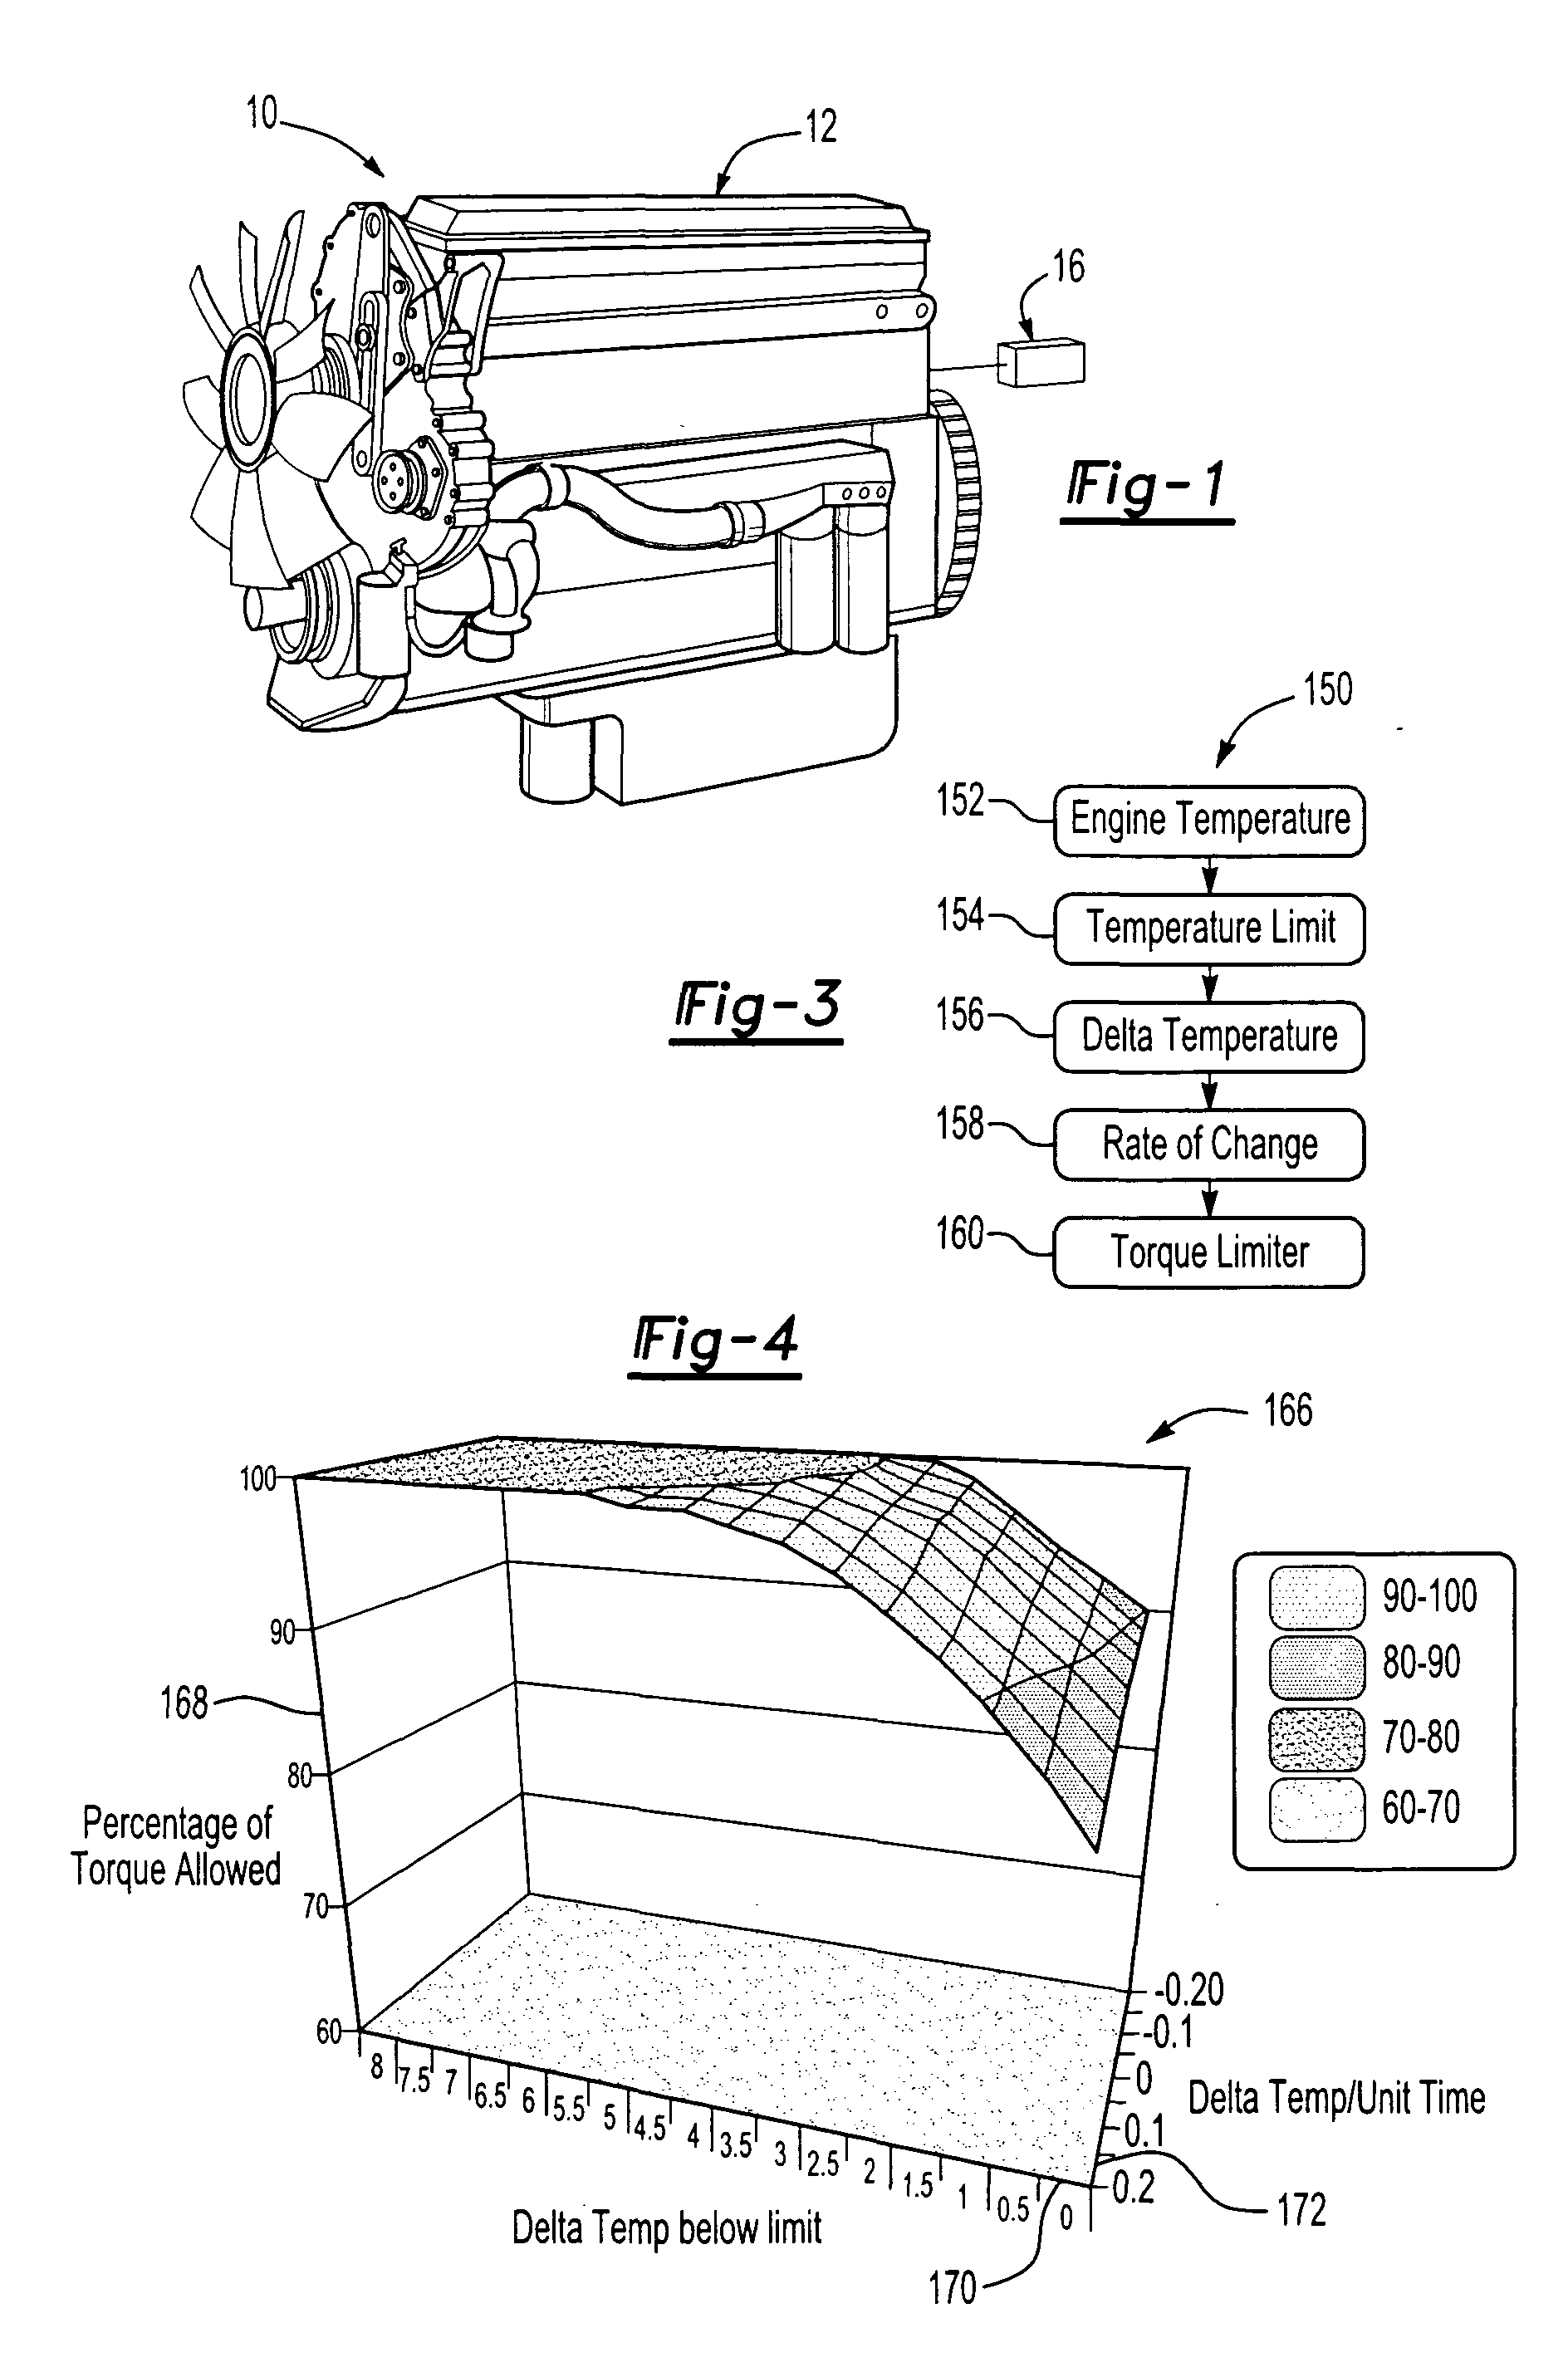 Method and system for controlling engine temperature by engine derating